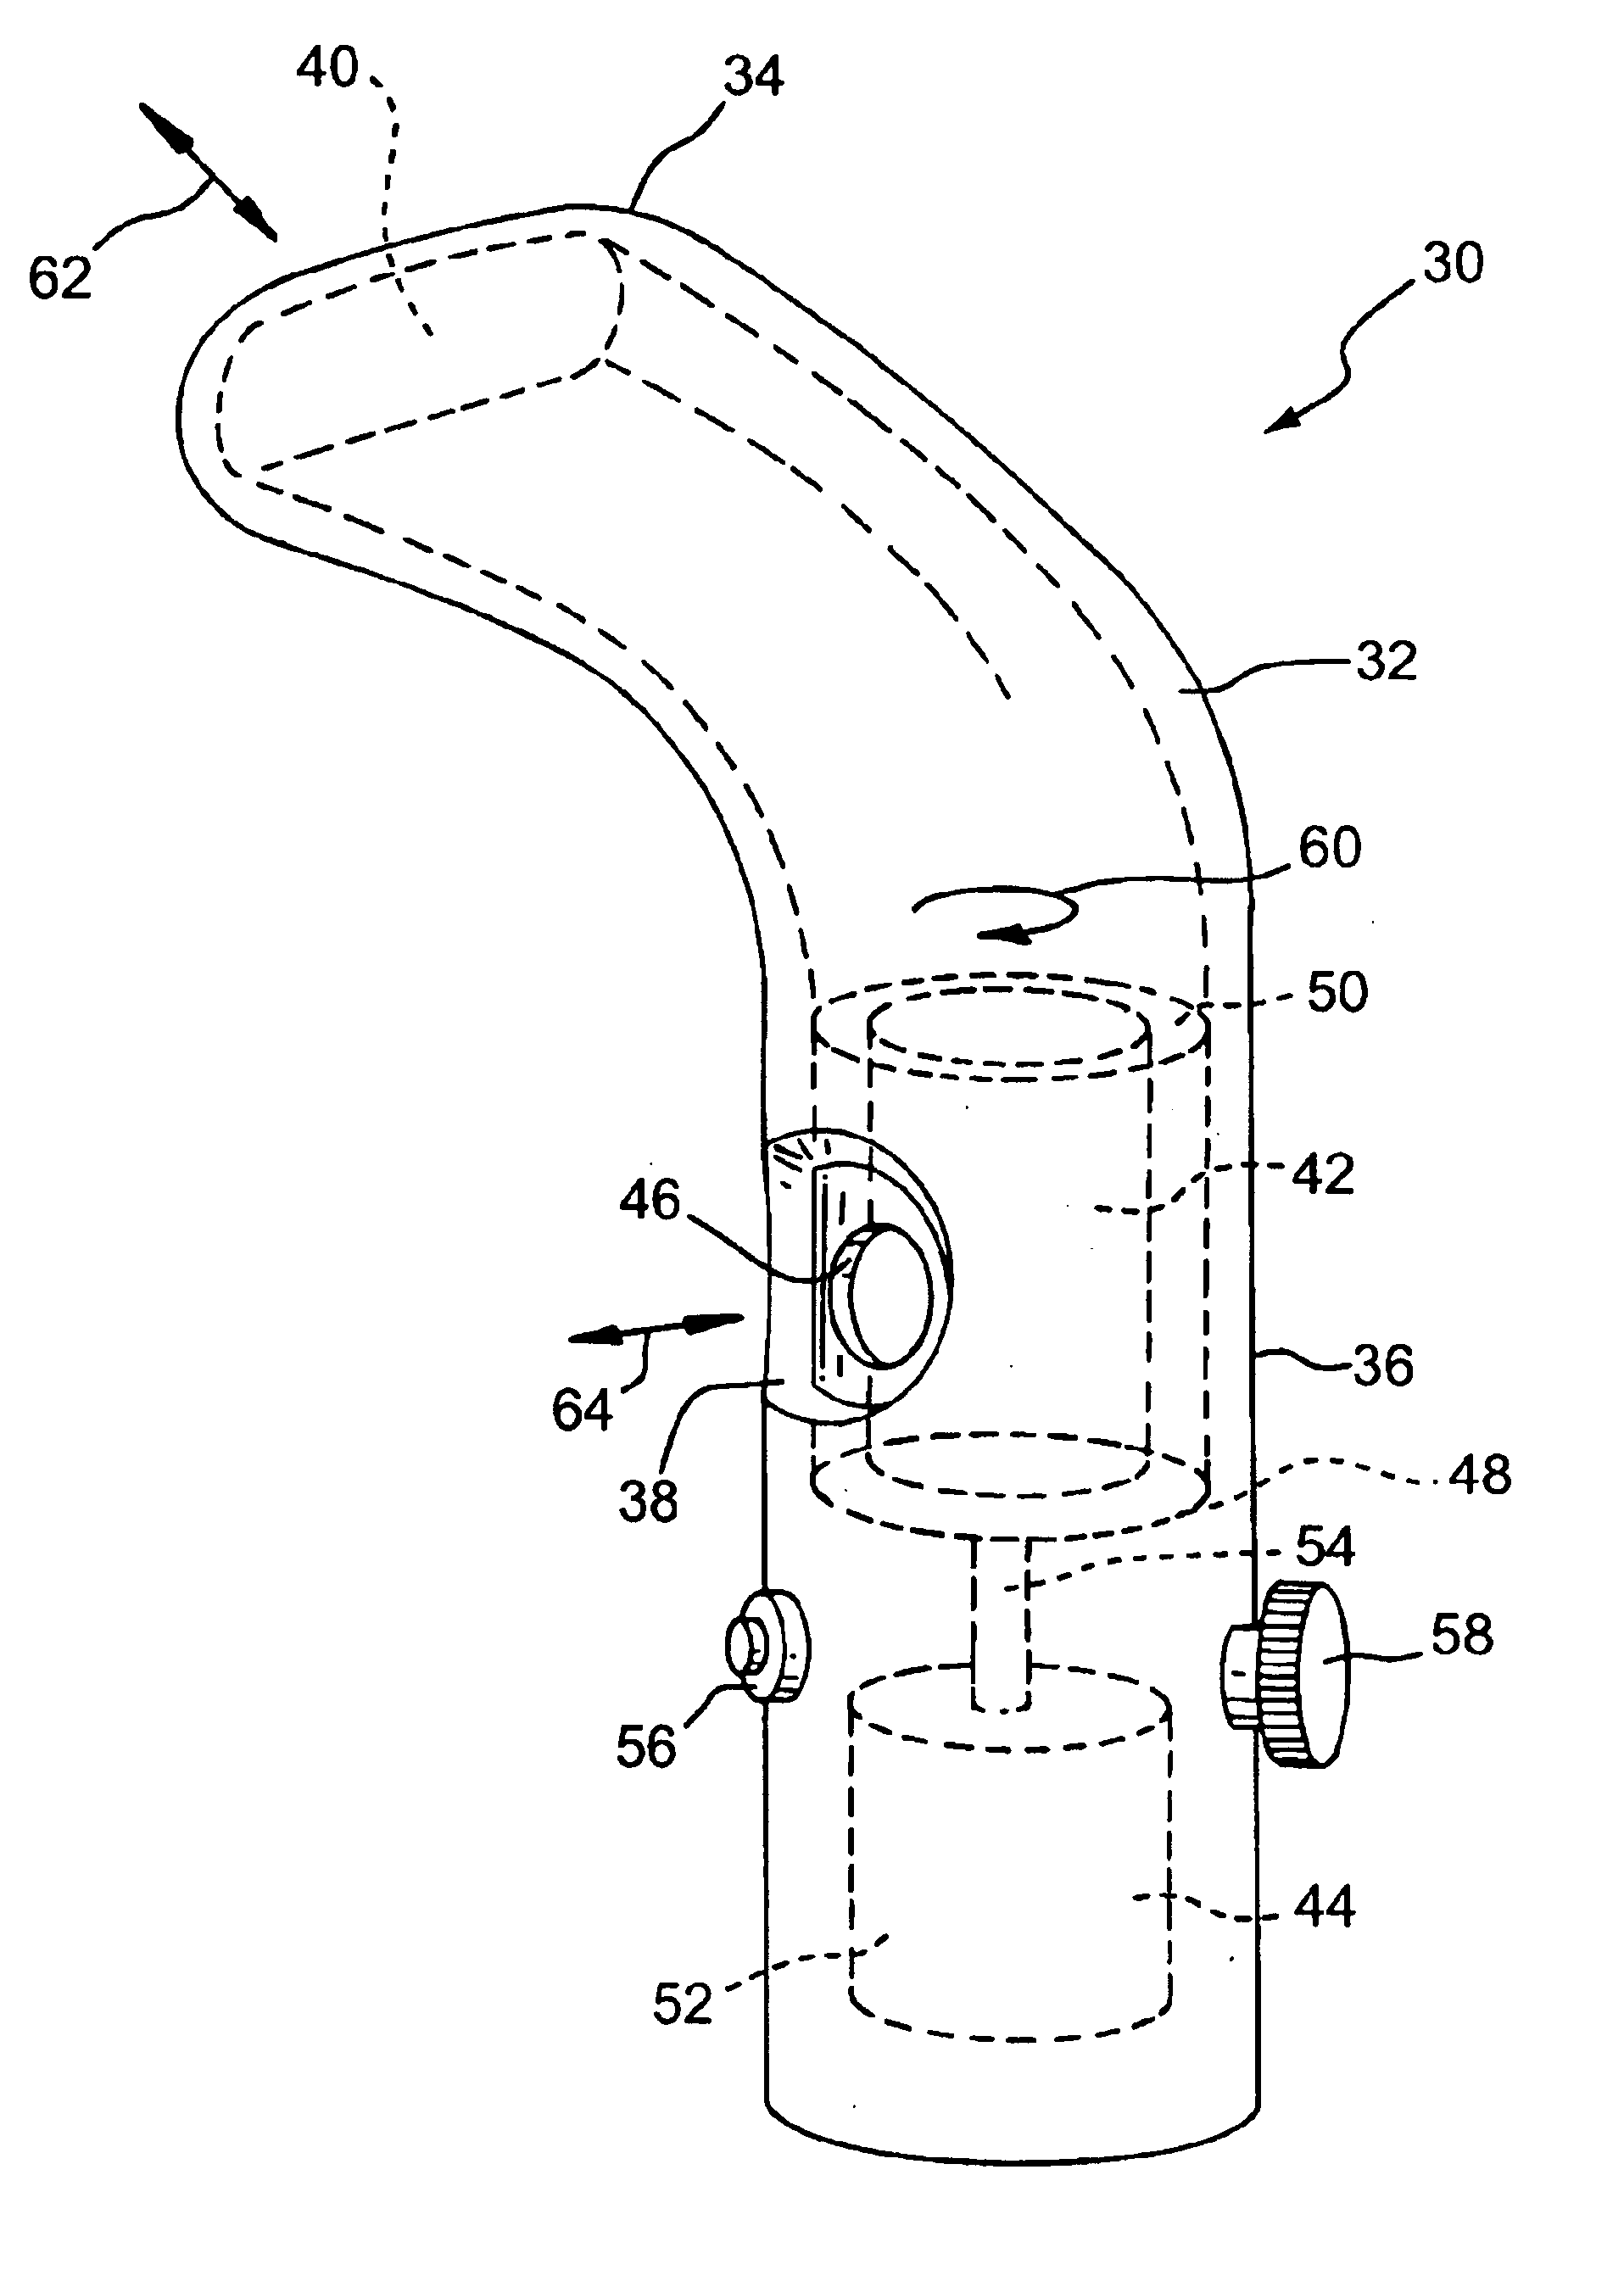 Apparatus and method for providing high frequency variable pressure to a patient